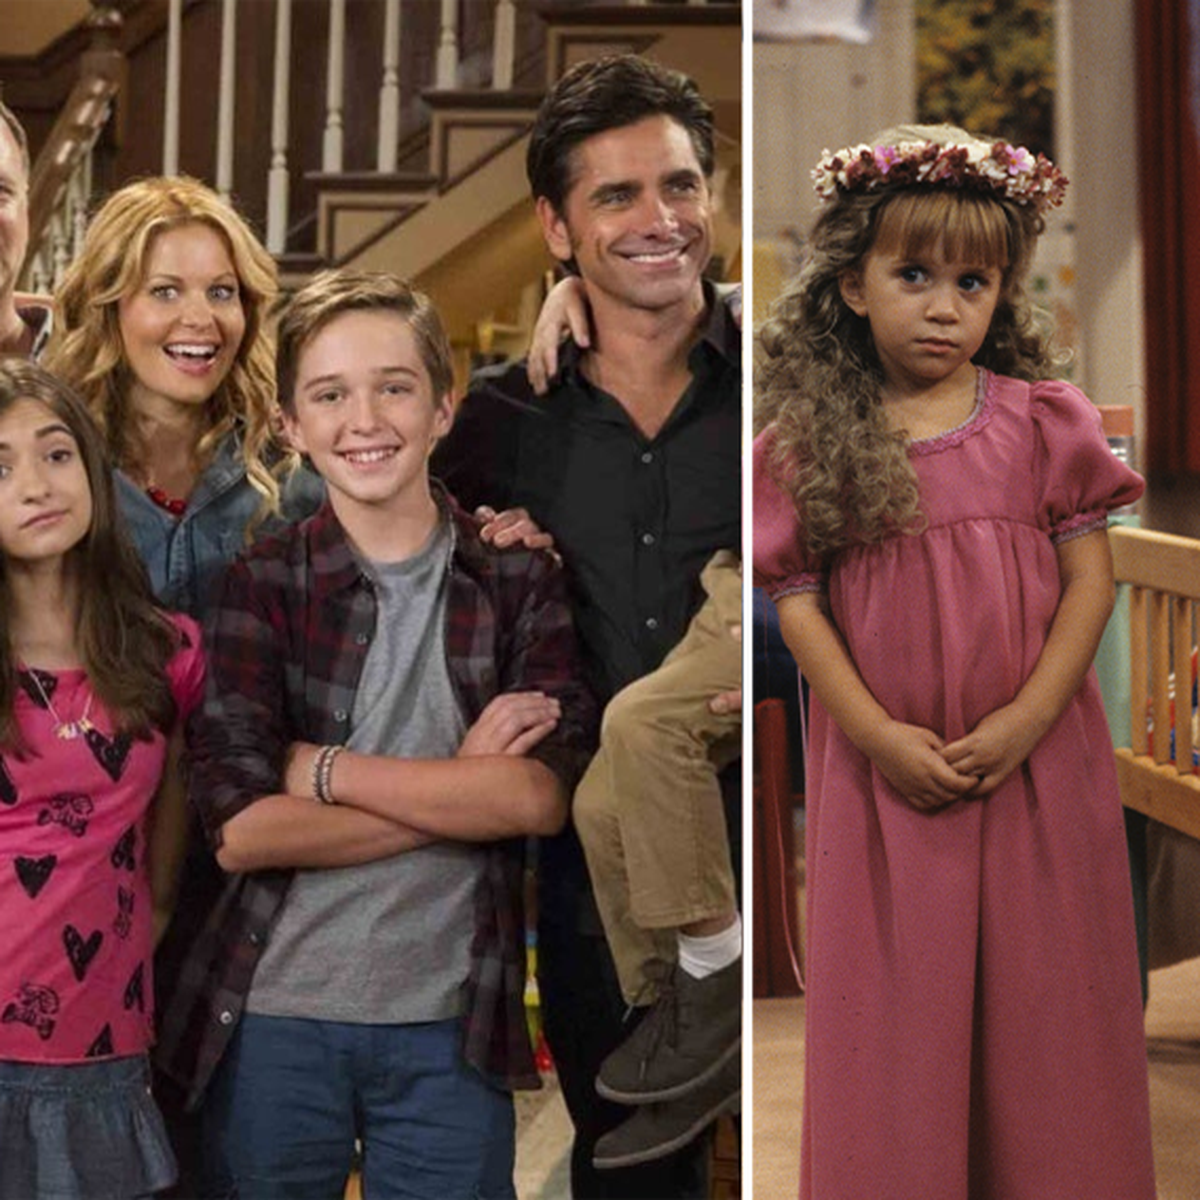 Fuller House made one final Mary-Kate and Ashley joke in farewell season - 9Celebrity